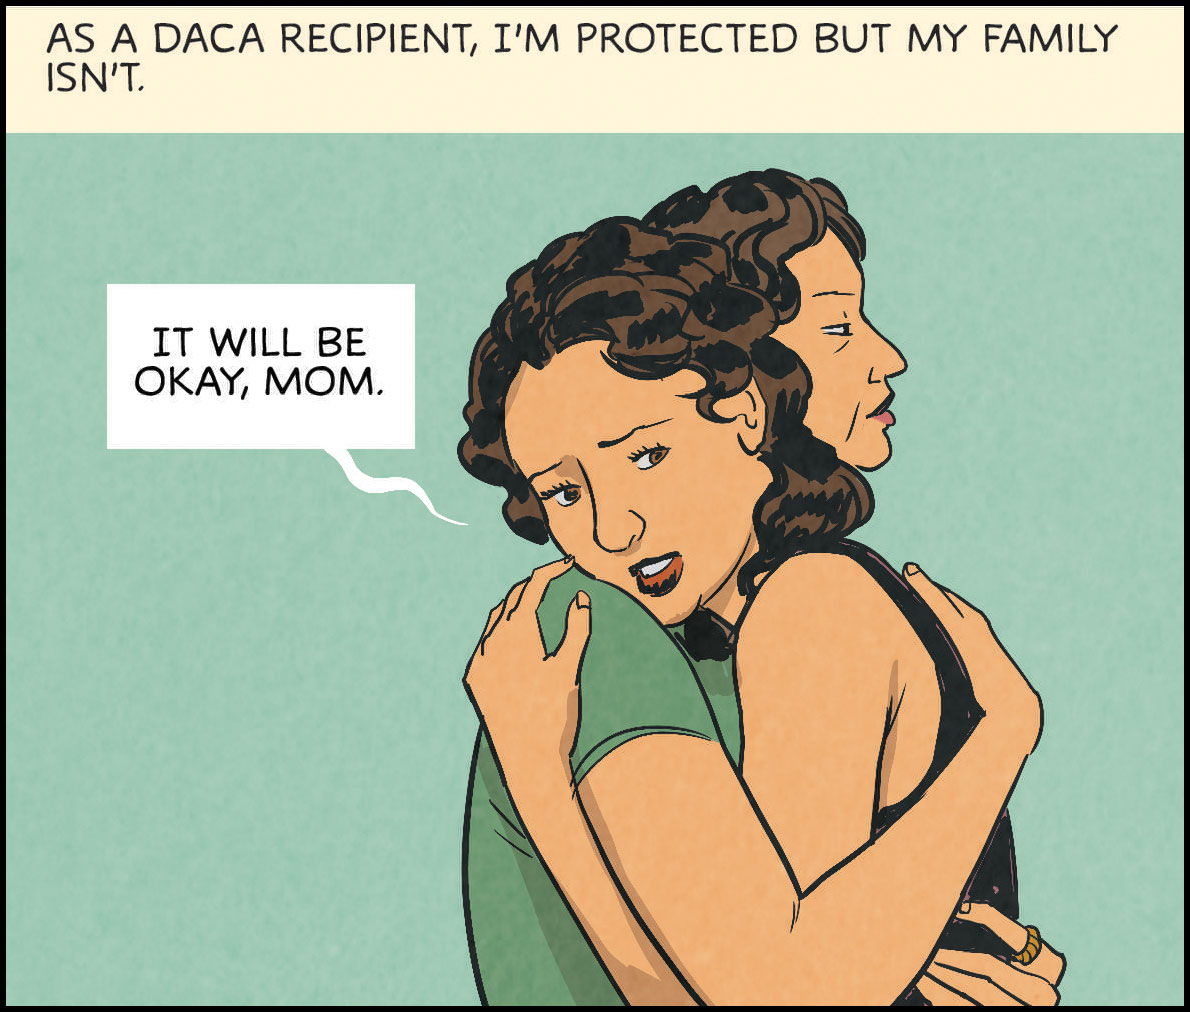 As a DACA recipient, I’m protected but my family isn’t. Quote from Katherine to Mom: “It will be okay, Mom.”